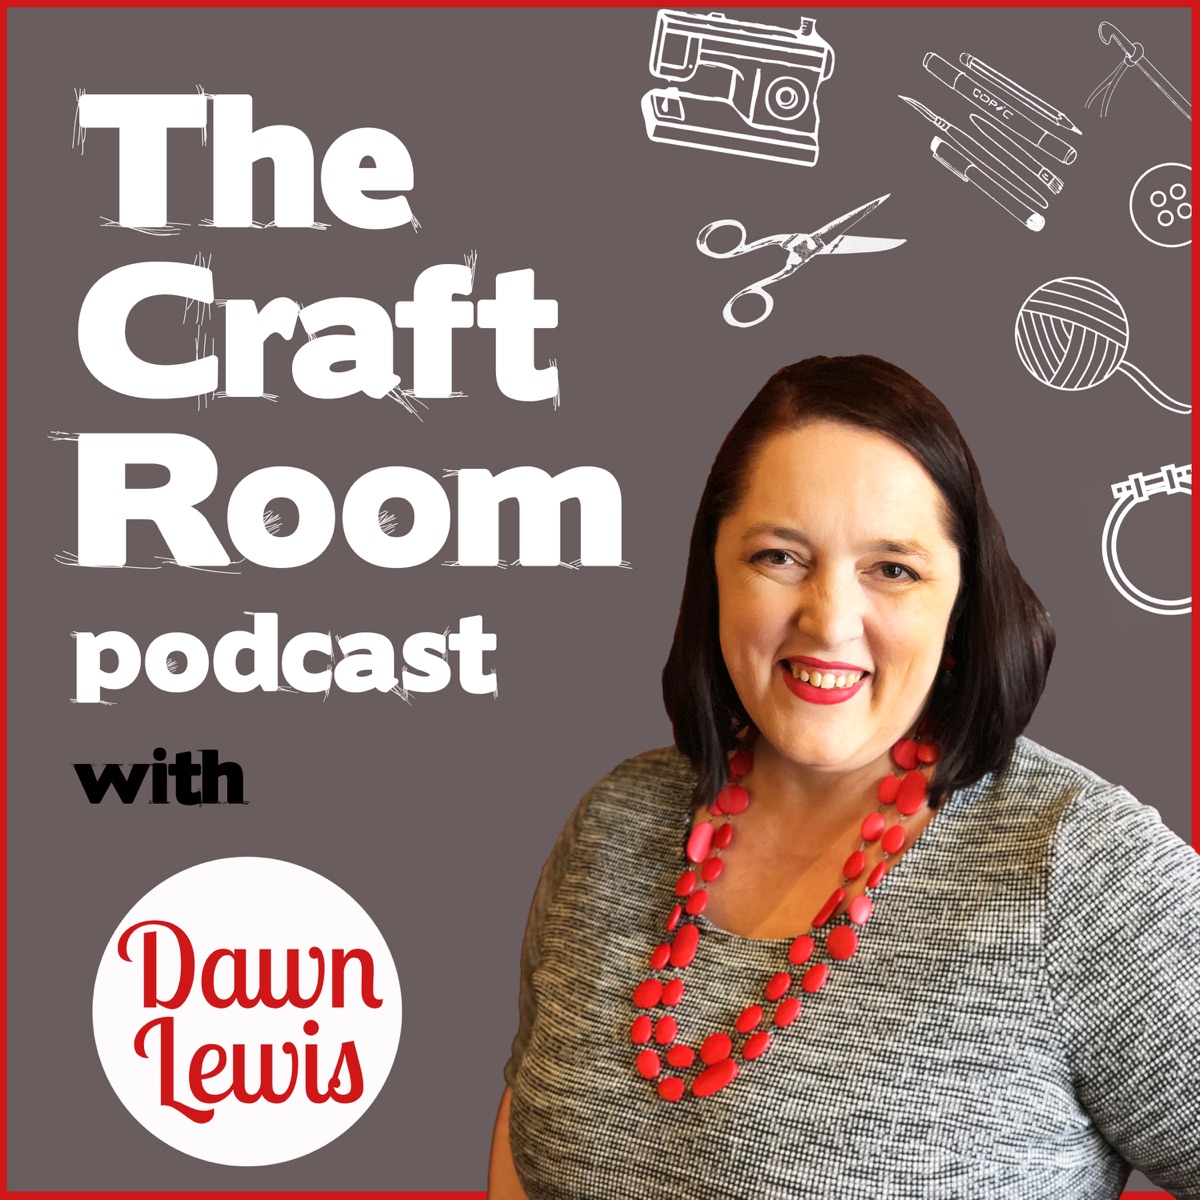 Download The Craft Room Podcast Podcast Podtail Yellowimages Mockups